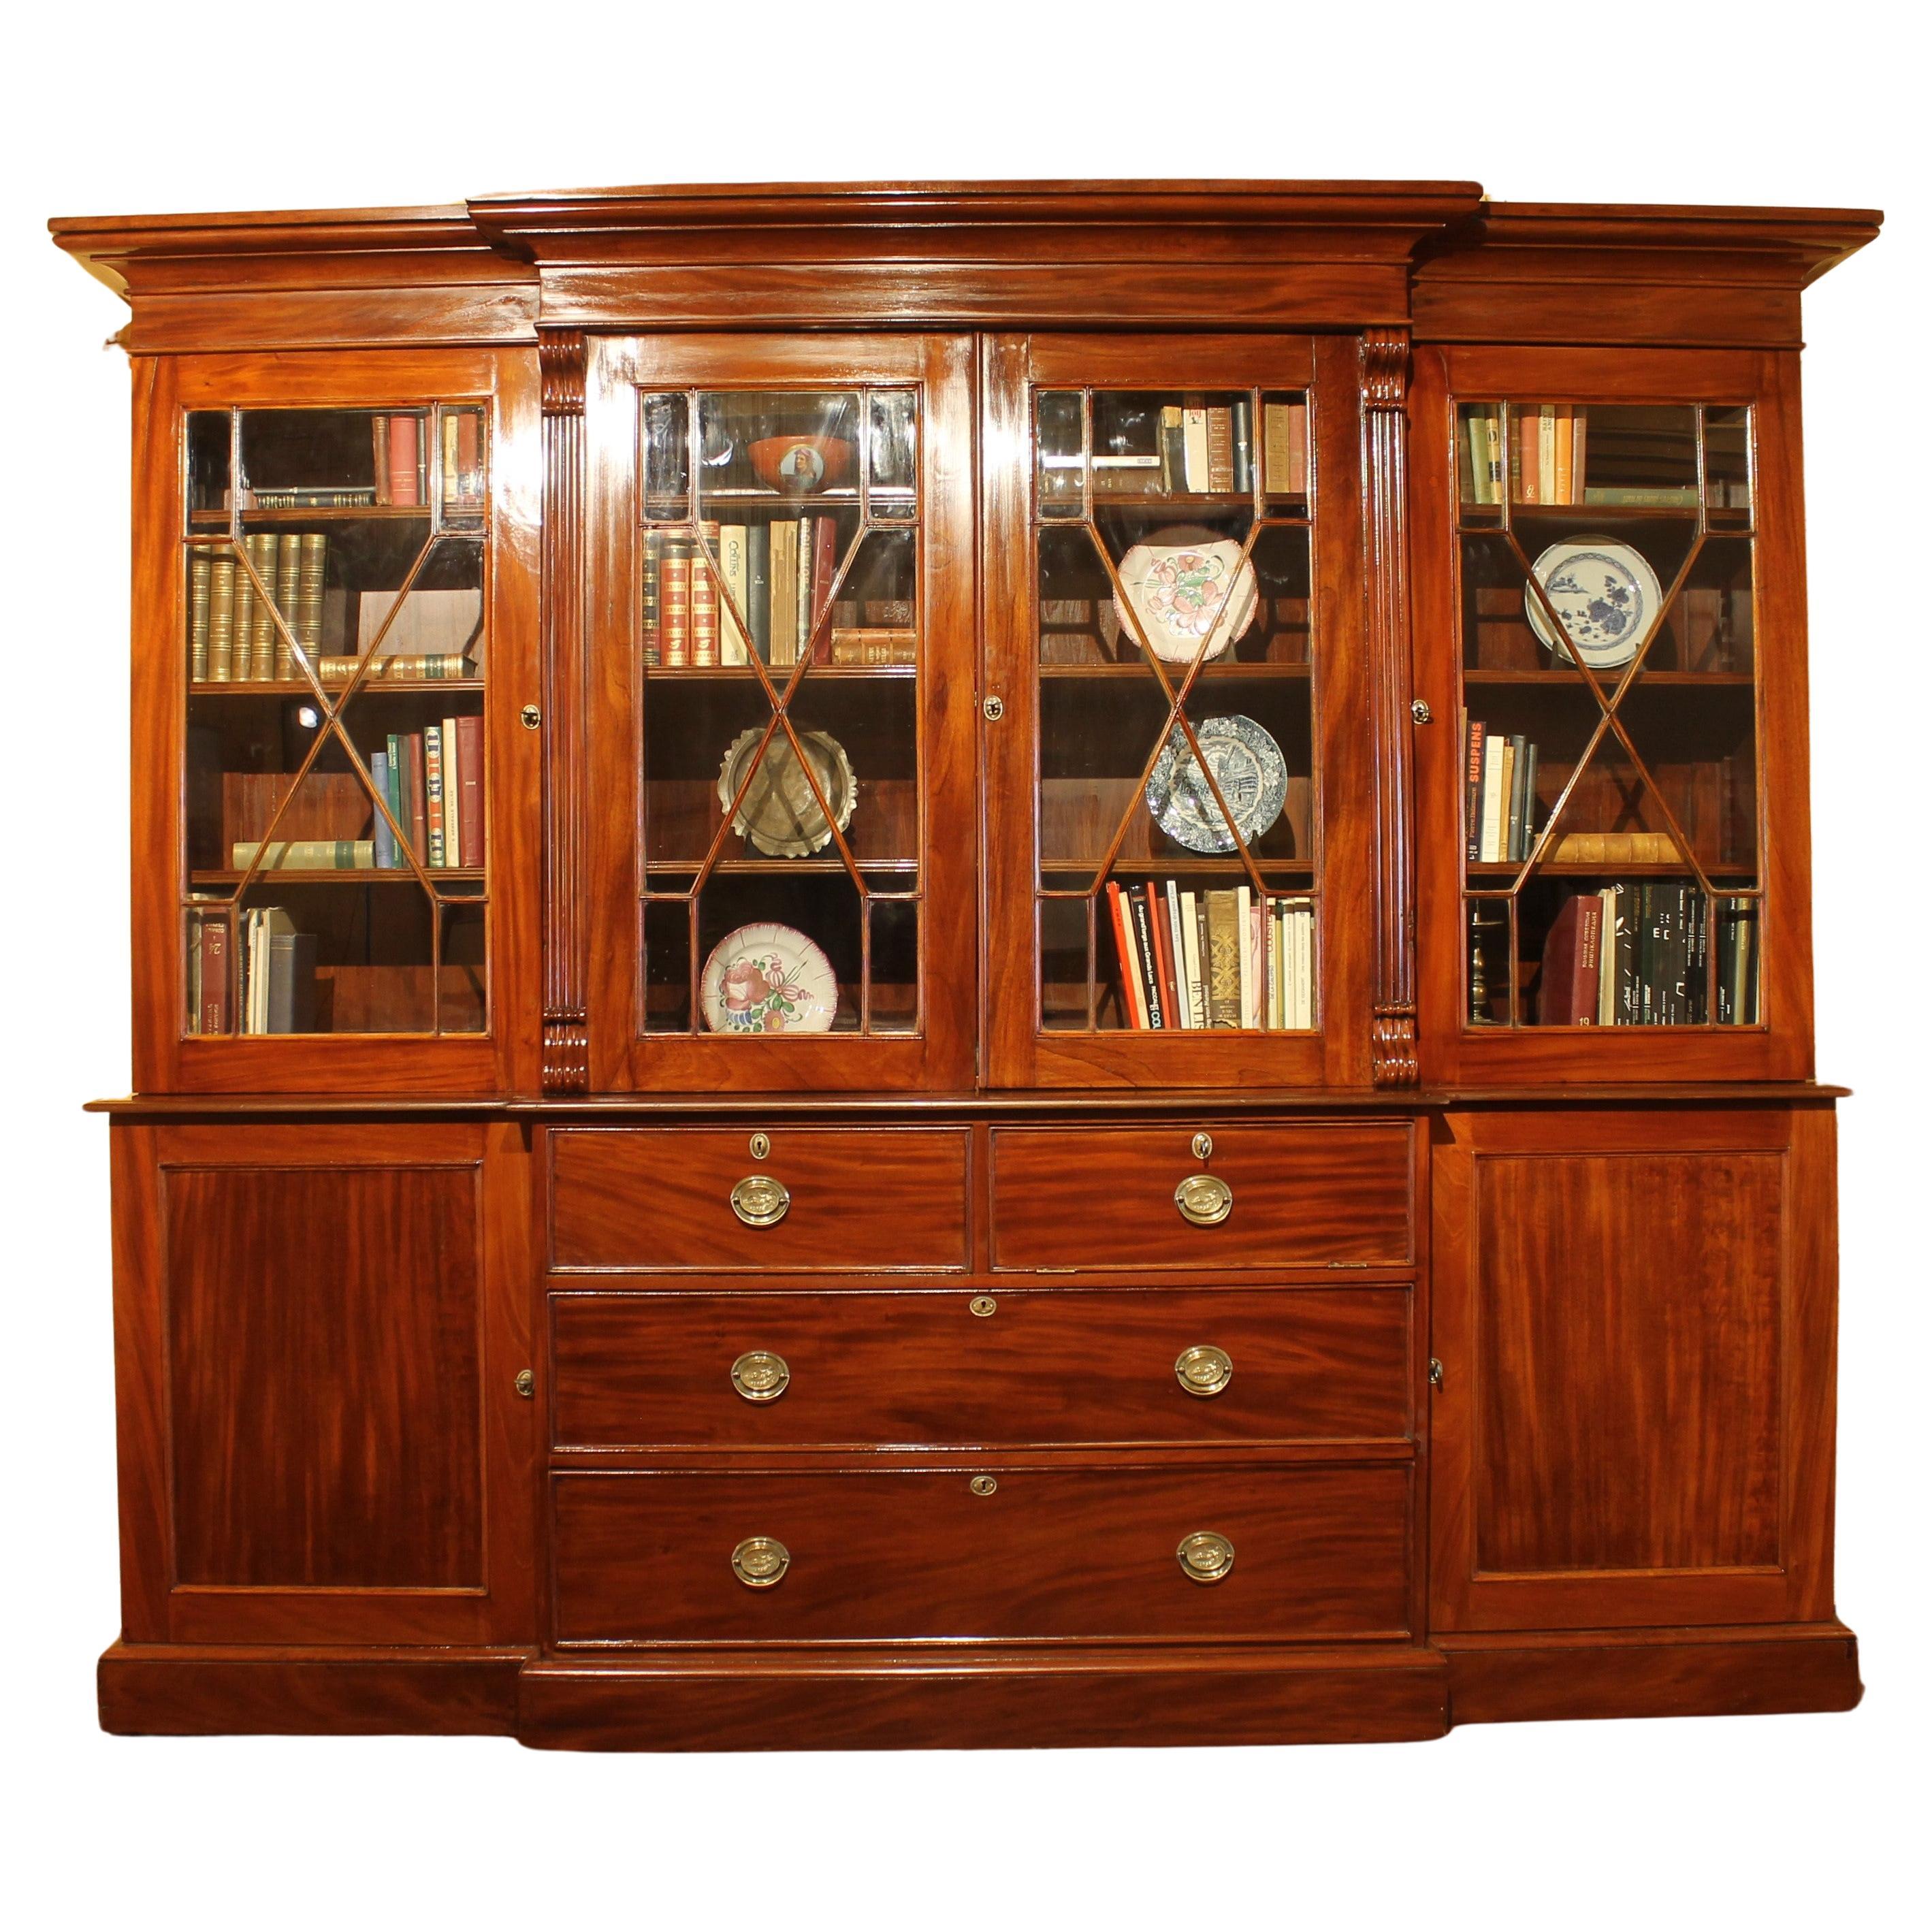 Important Mahogany Library Bookcase From The 19th Century From England For Sale